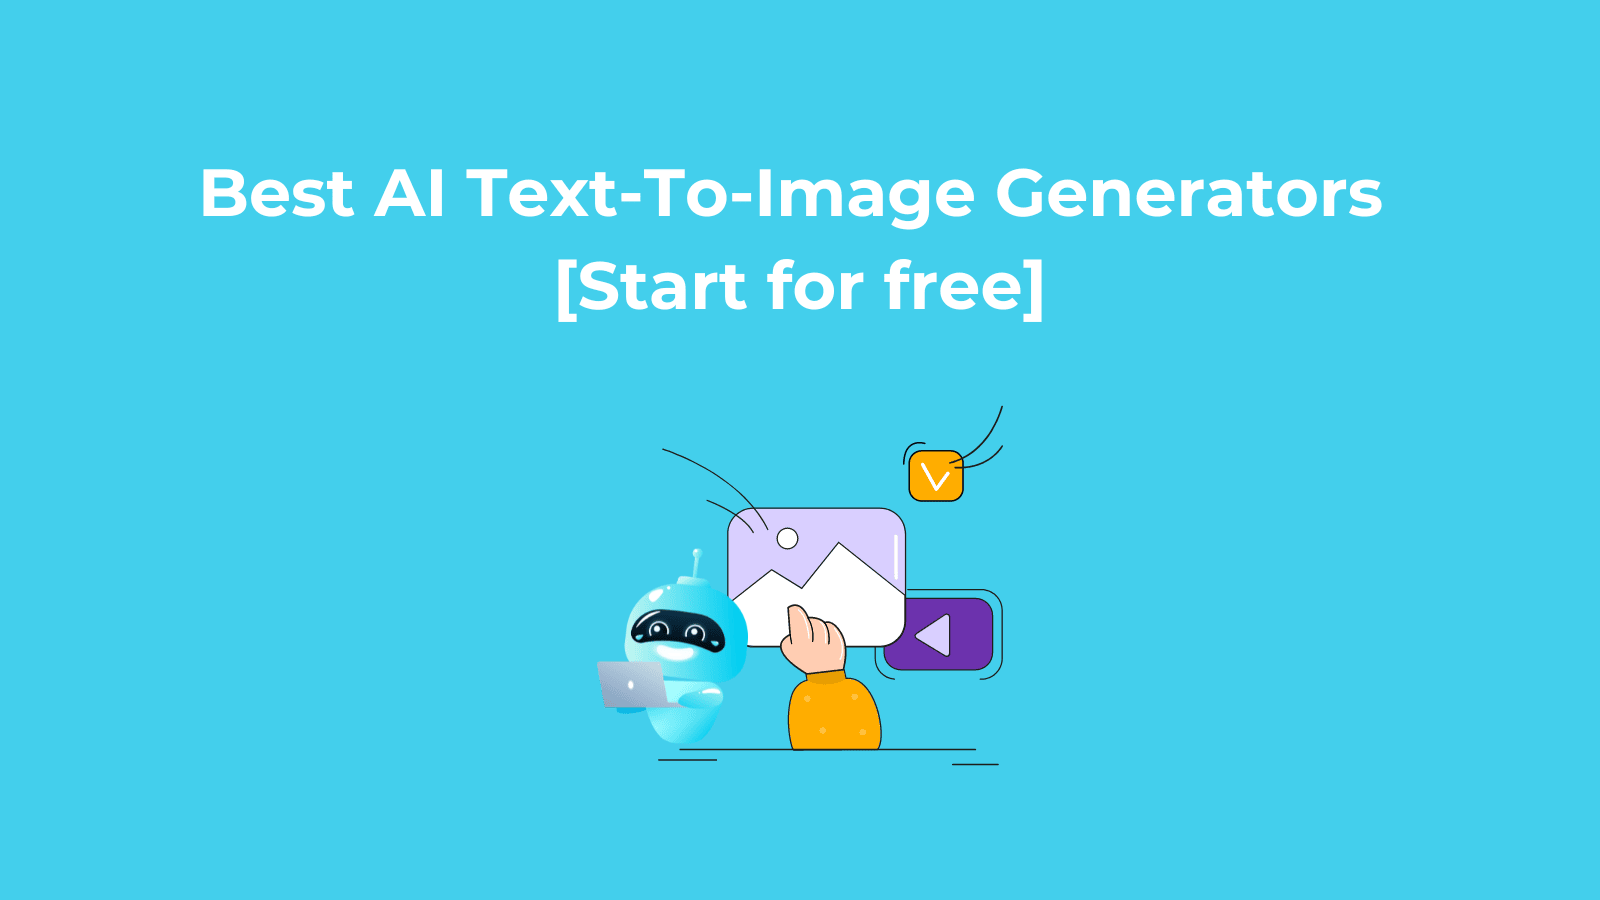 Best AI Text-To-Image Generators